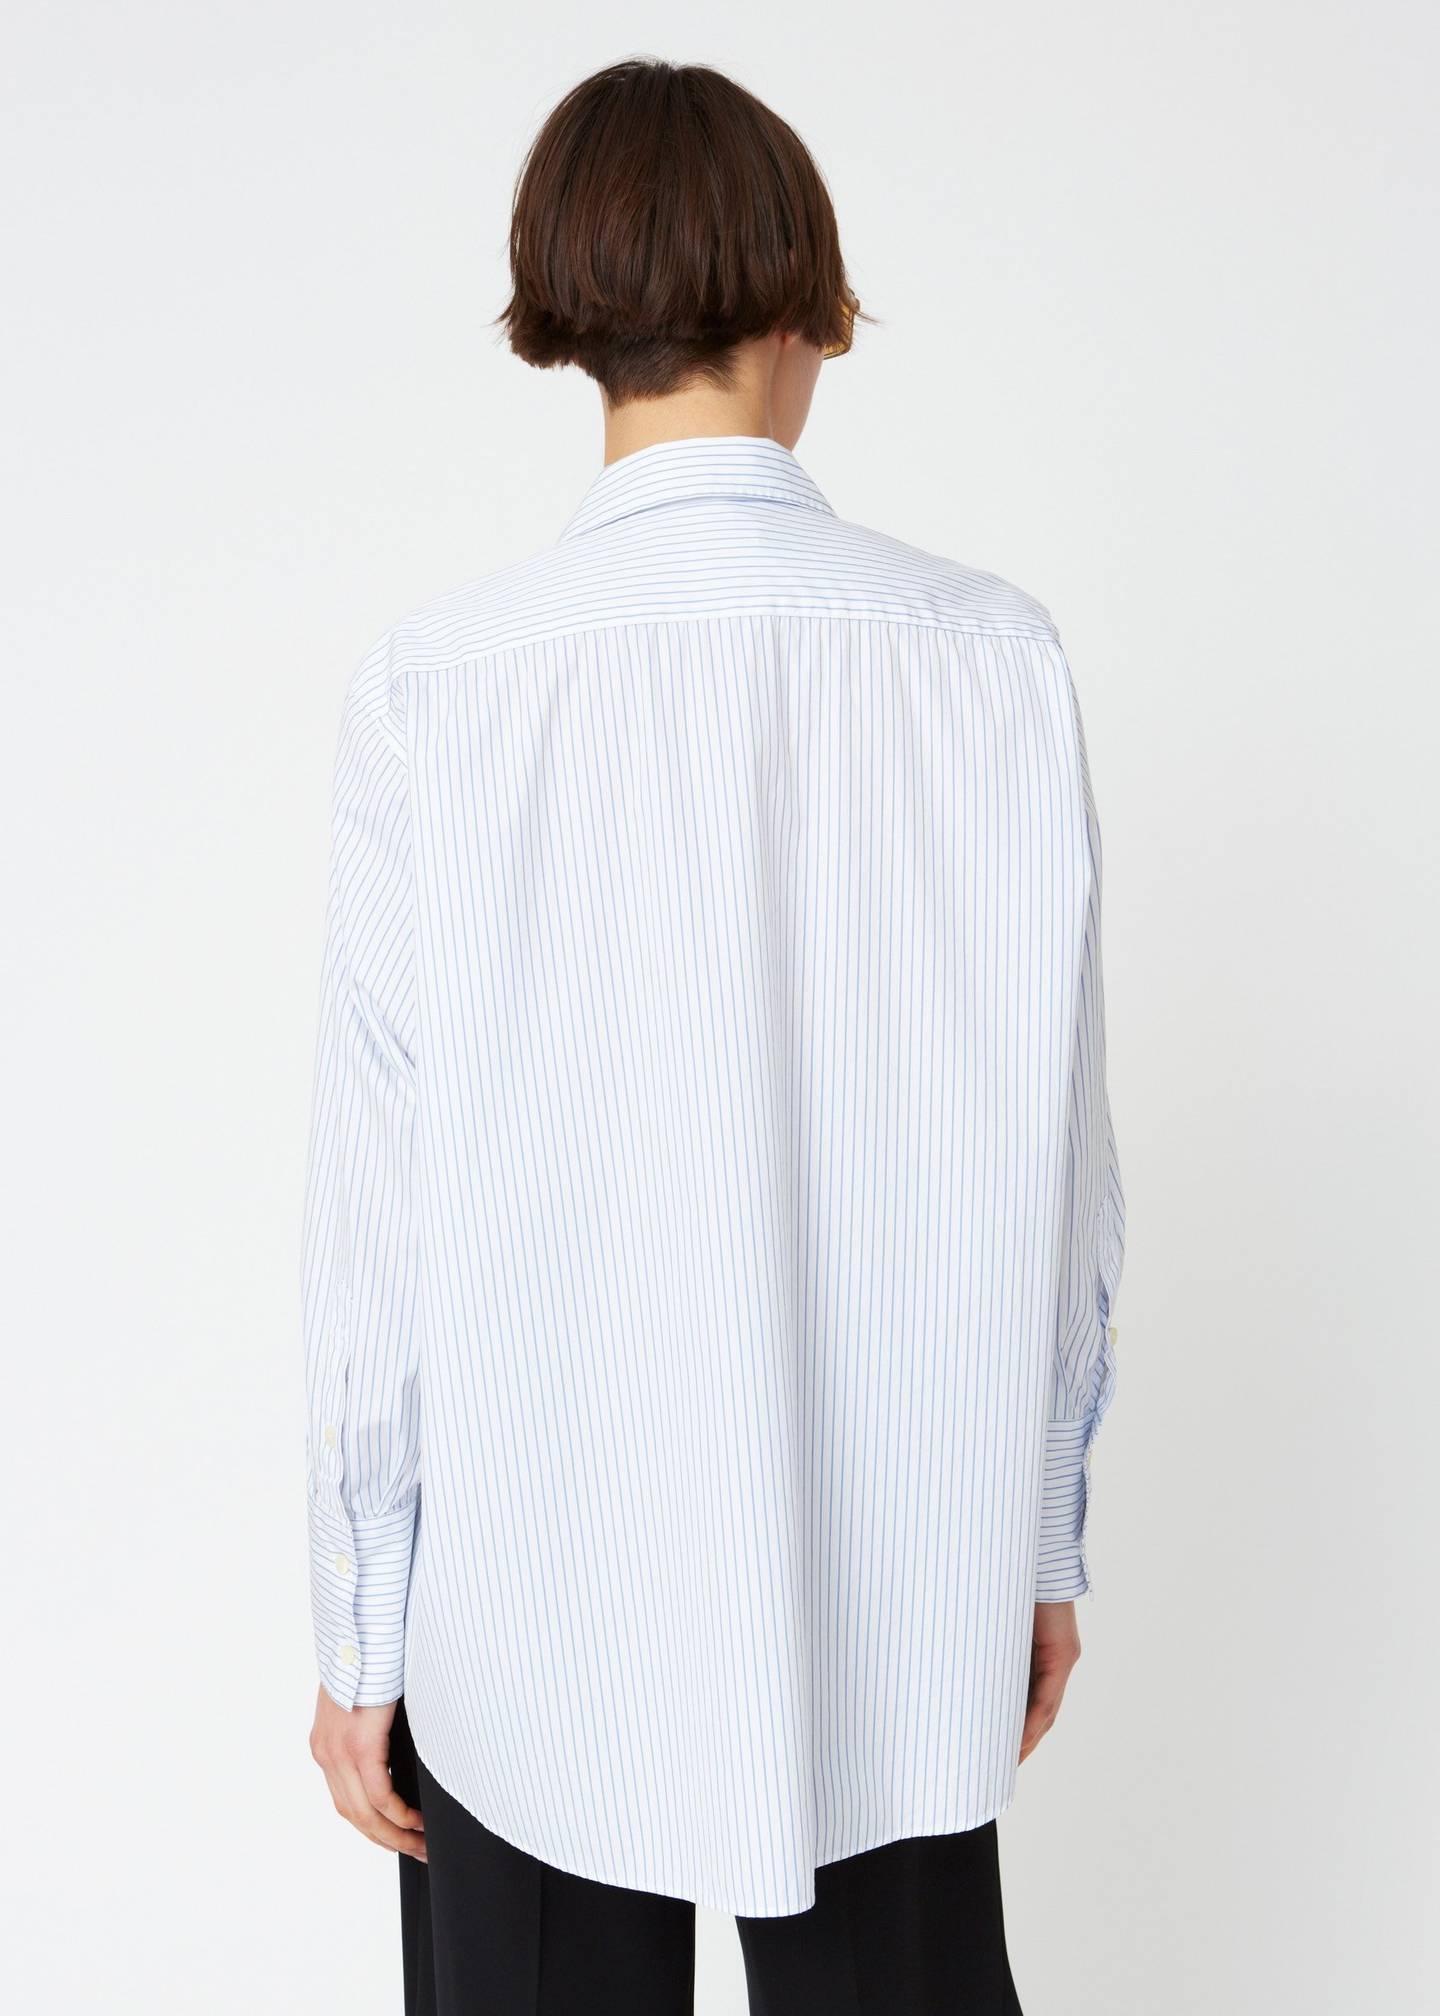 RELAXED SHIRT IN BLUE STRIPES